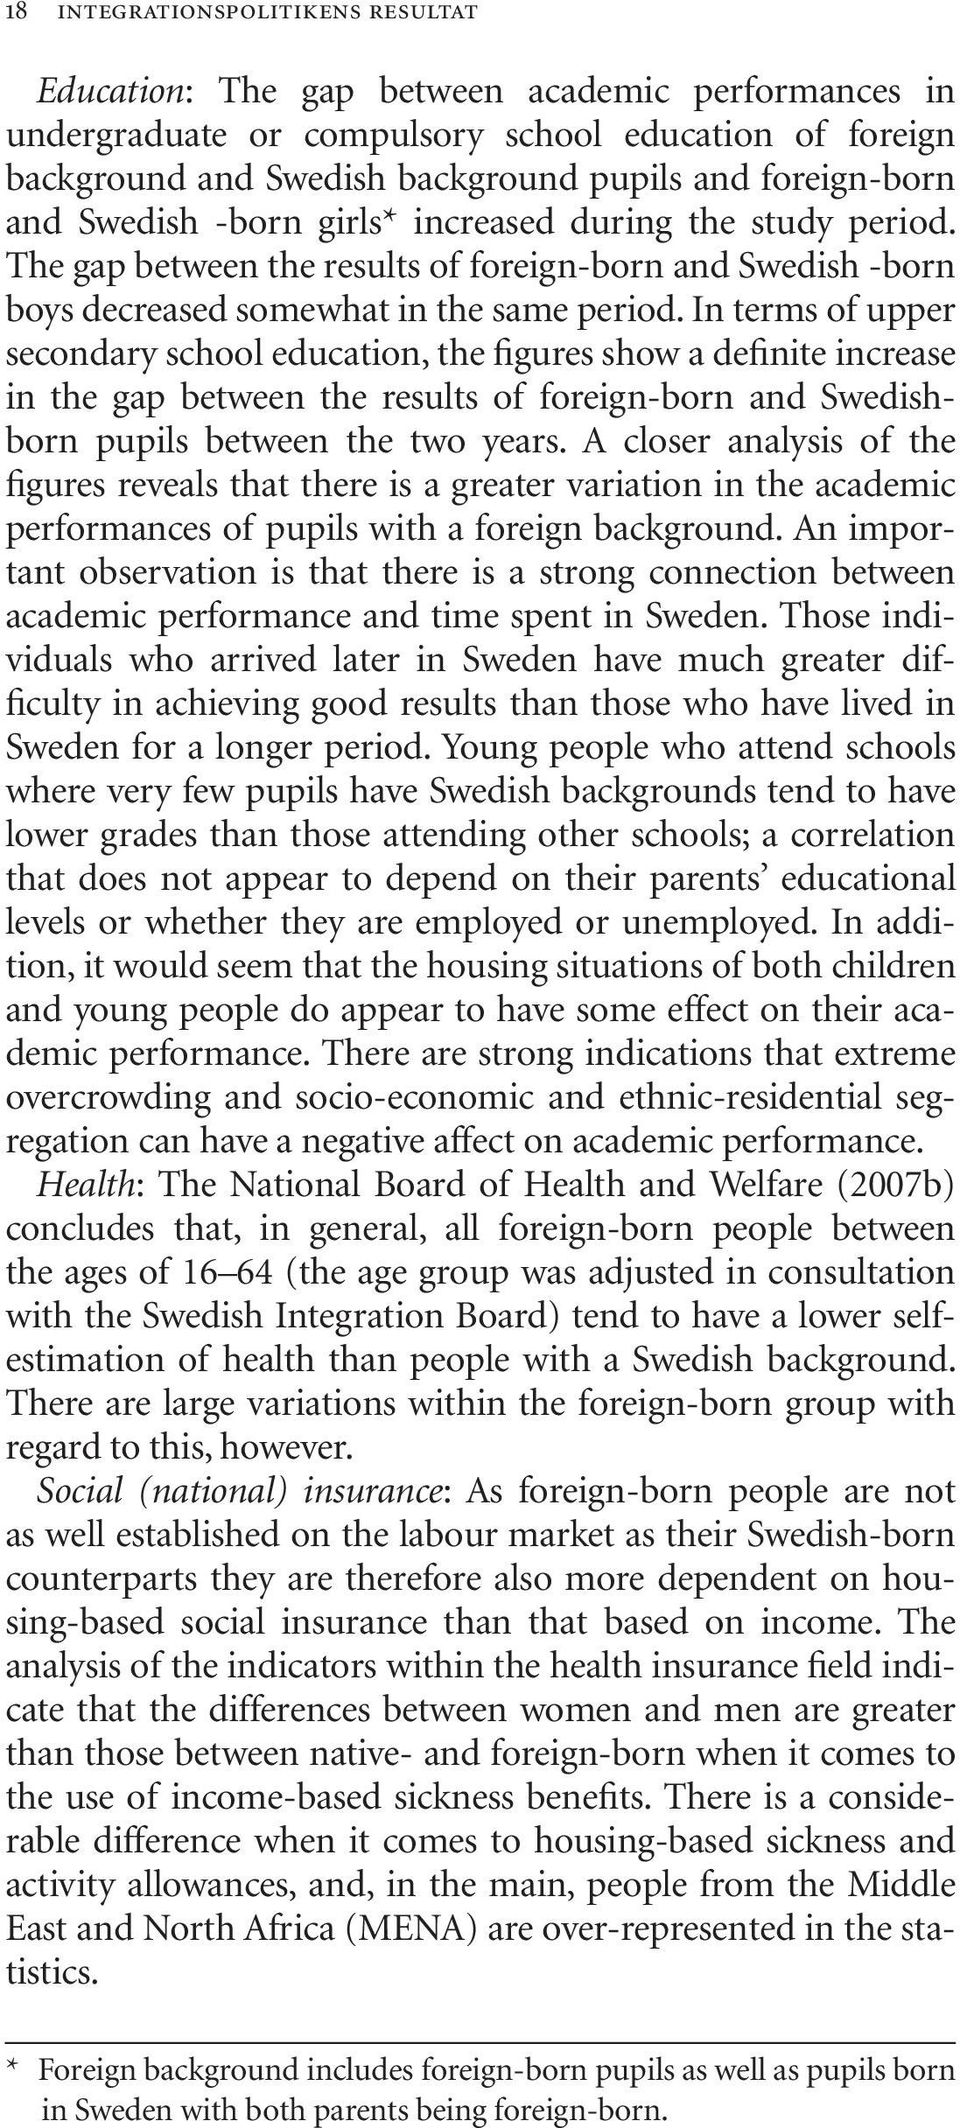 In terms of upper secondary school education, the figures show a definite increase in the gap between the results of foreign-born and Swedishborn pupils between the two years.